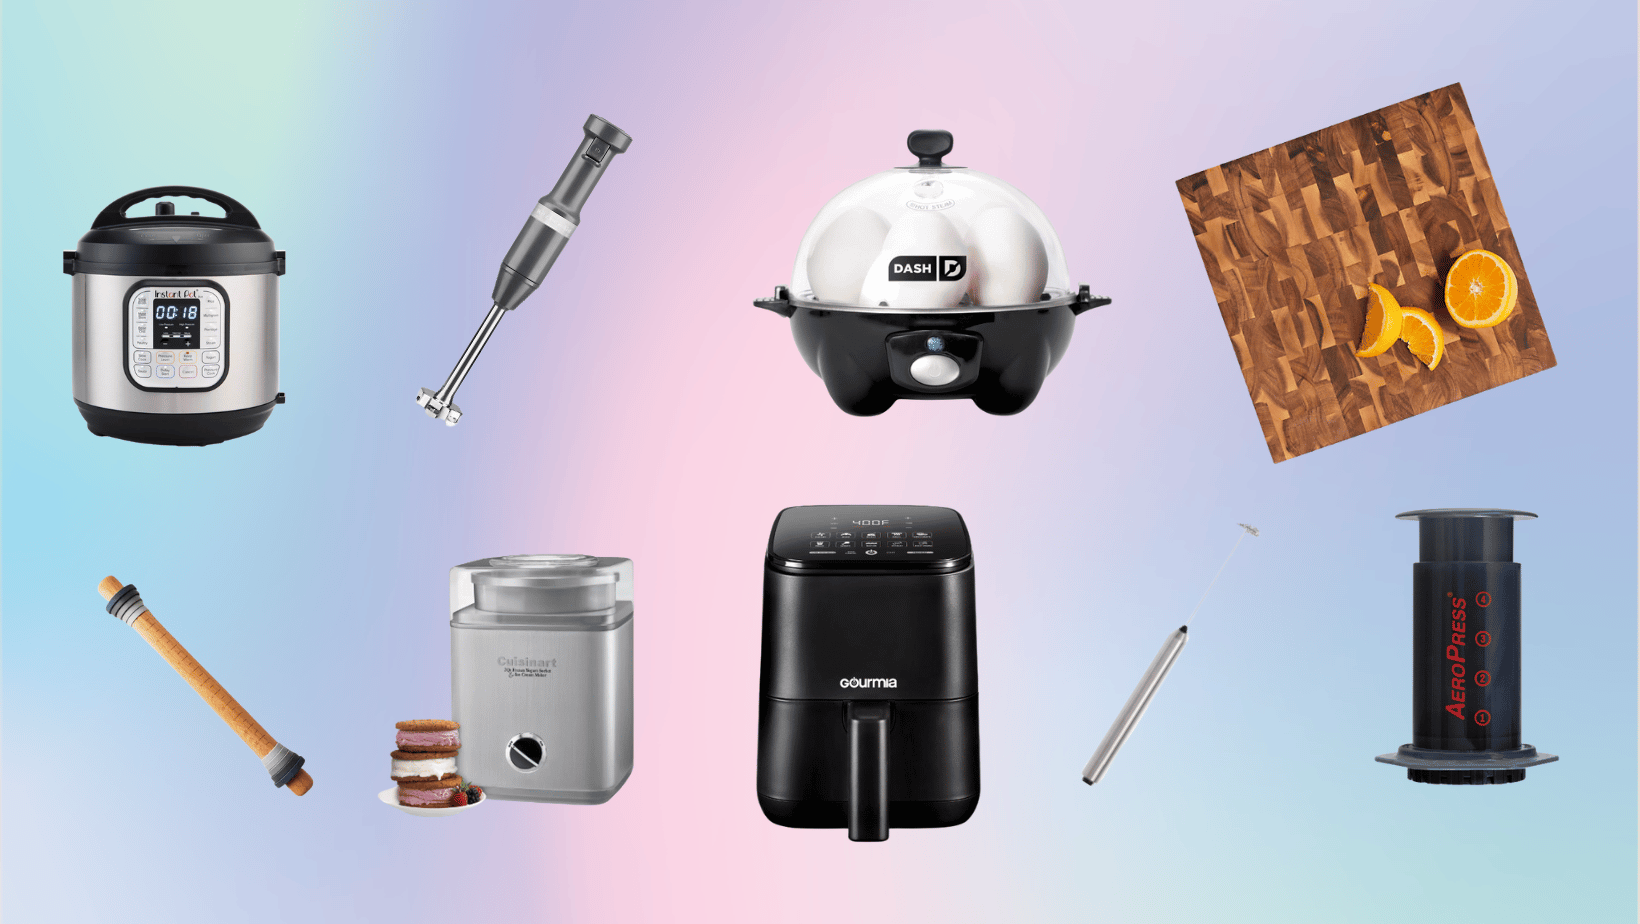 10 cheap, trusty kitchen tools for last-minute gifts - The